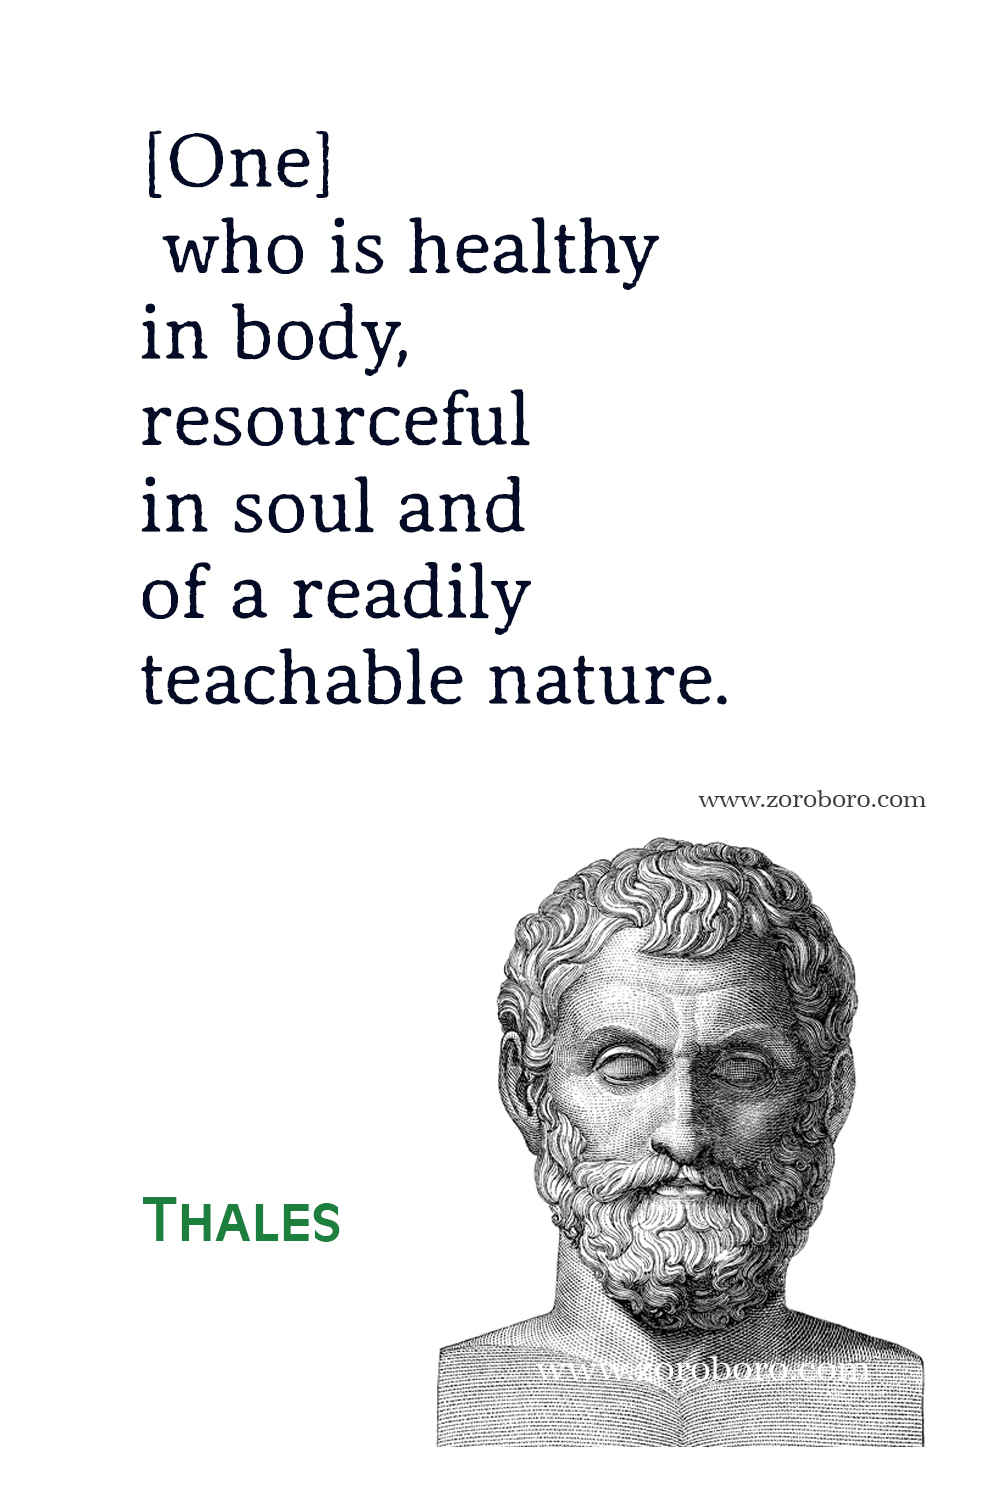 Thales Quotes, Thales Philosophy, Thales Books Quotes, Thales Image, Thales Science / Thales Theory Quotes. Thales of Miletus.